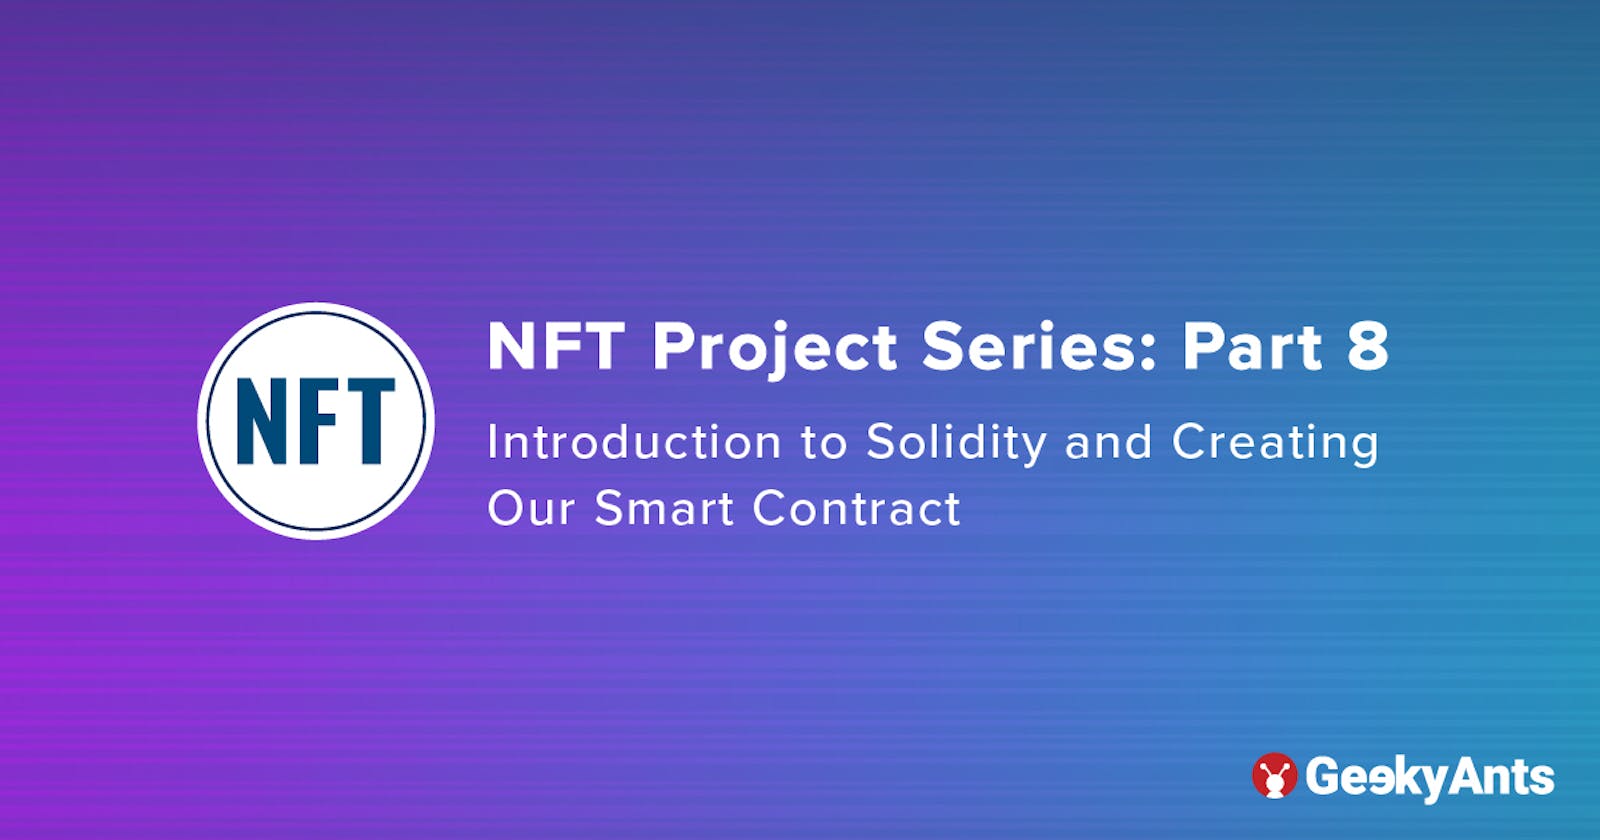 NFT Project Series Part 8: Introduction to Solidity and Creating Our Smart Contract